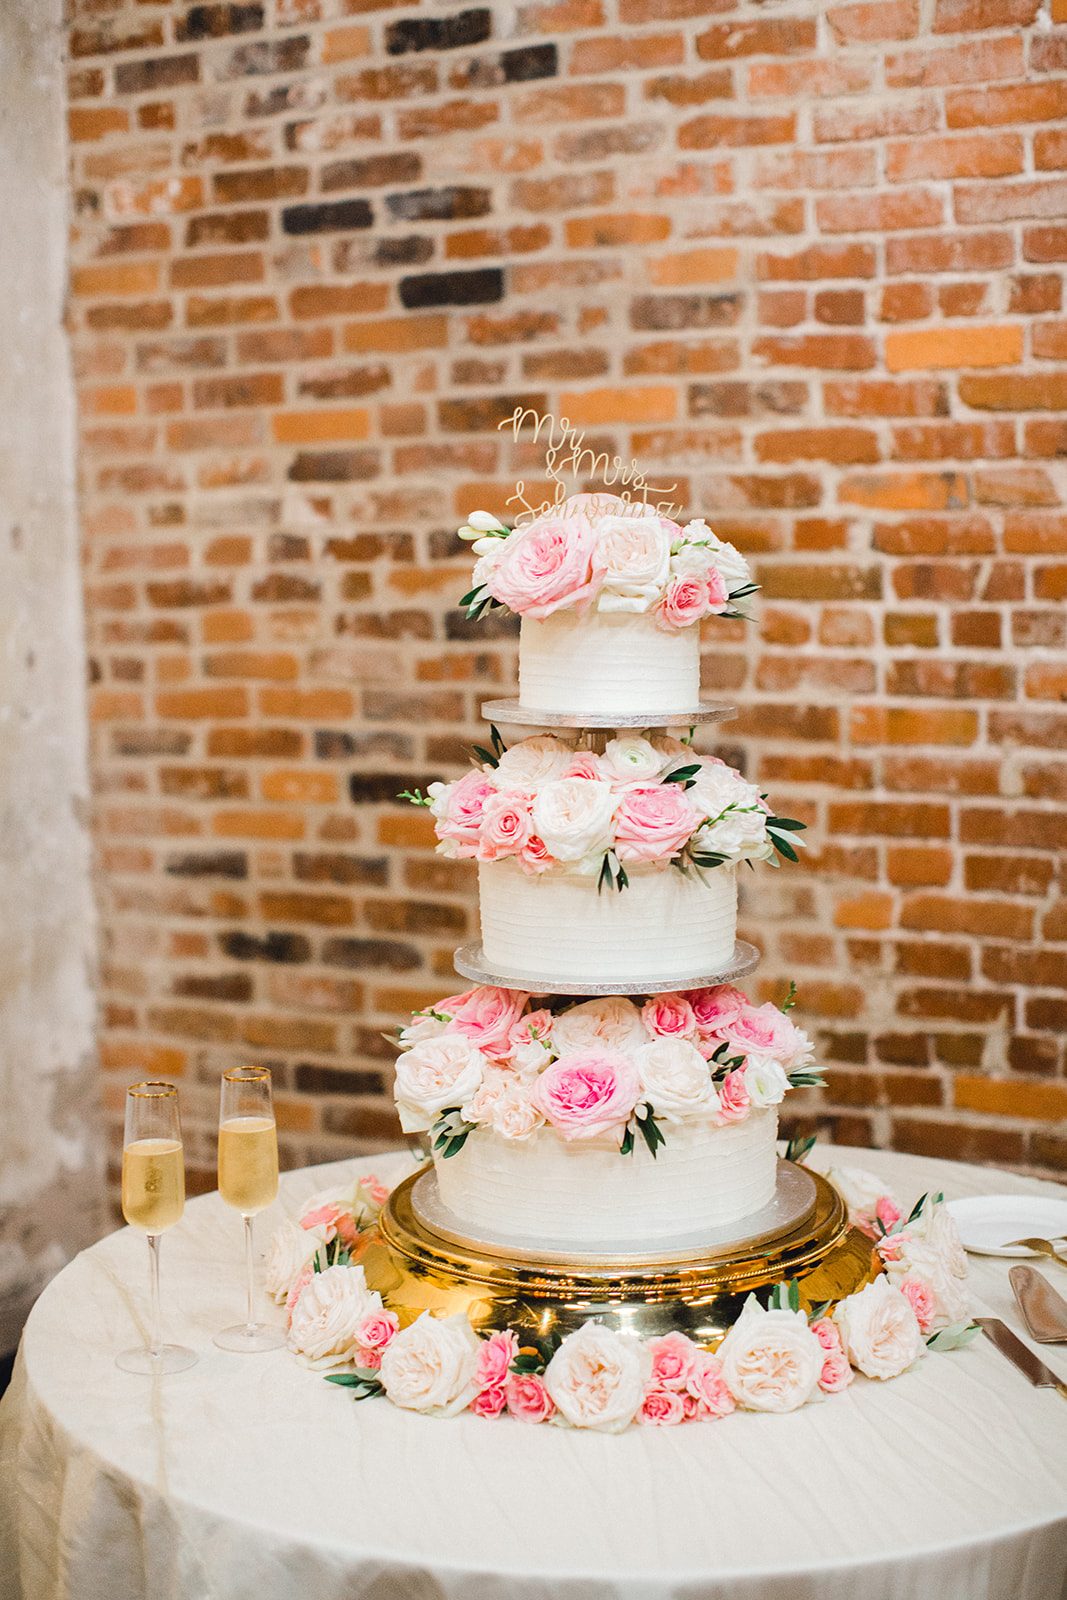 Pink and white floral wedding cake design